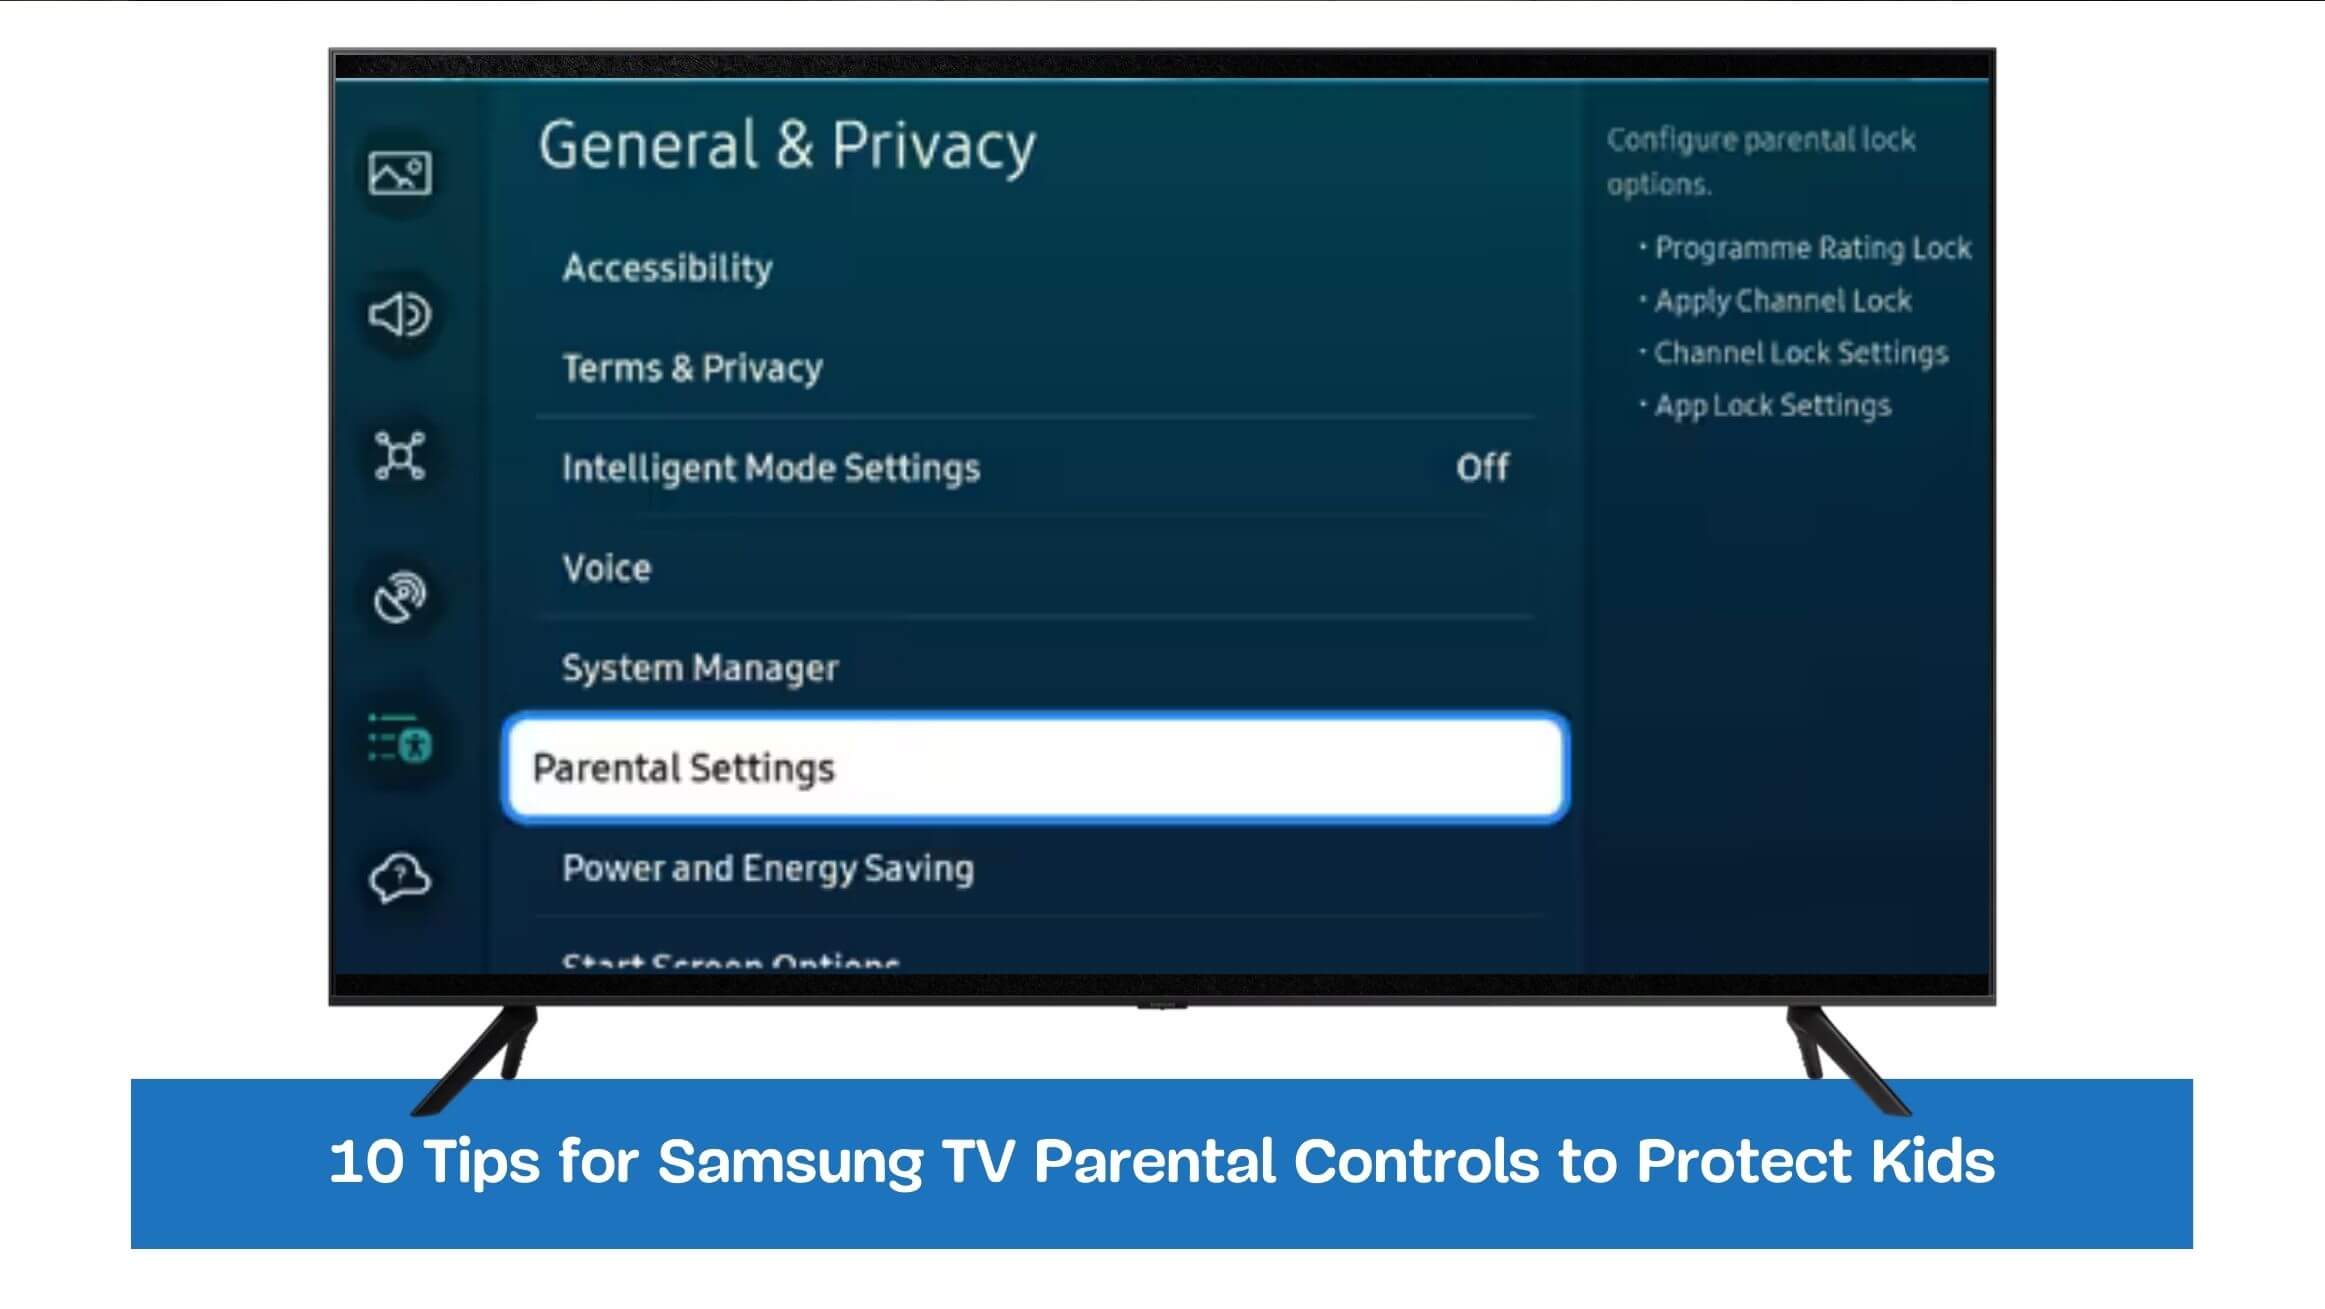 10 Tips for Samsung TV Parental Controls to Protect Kids